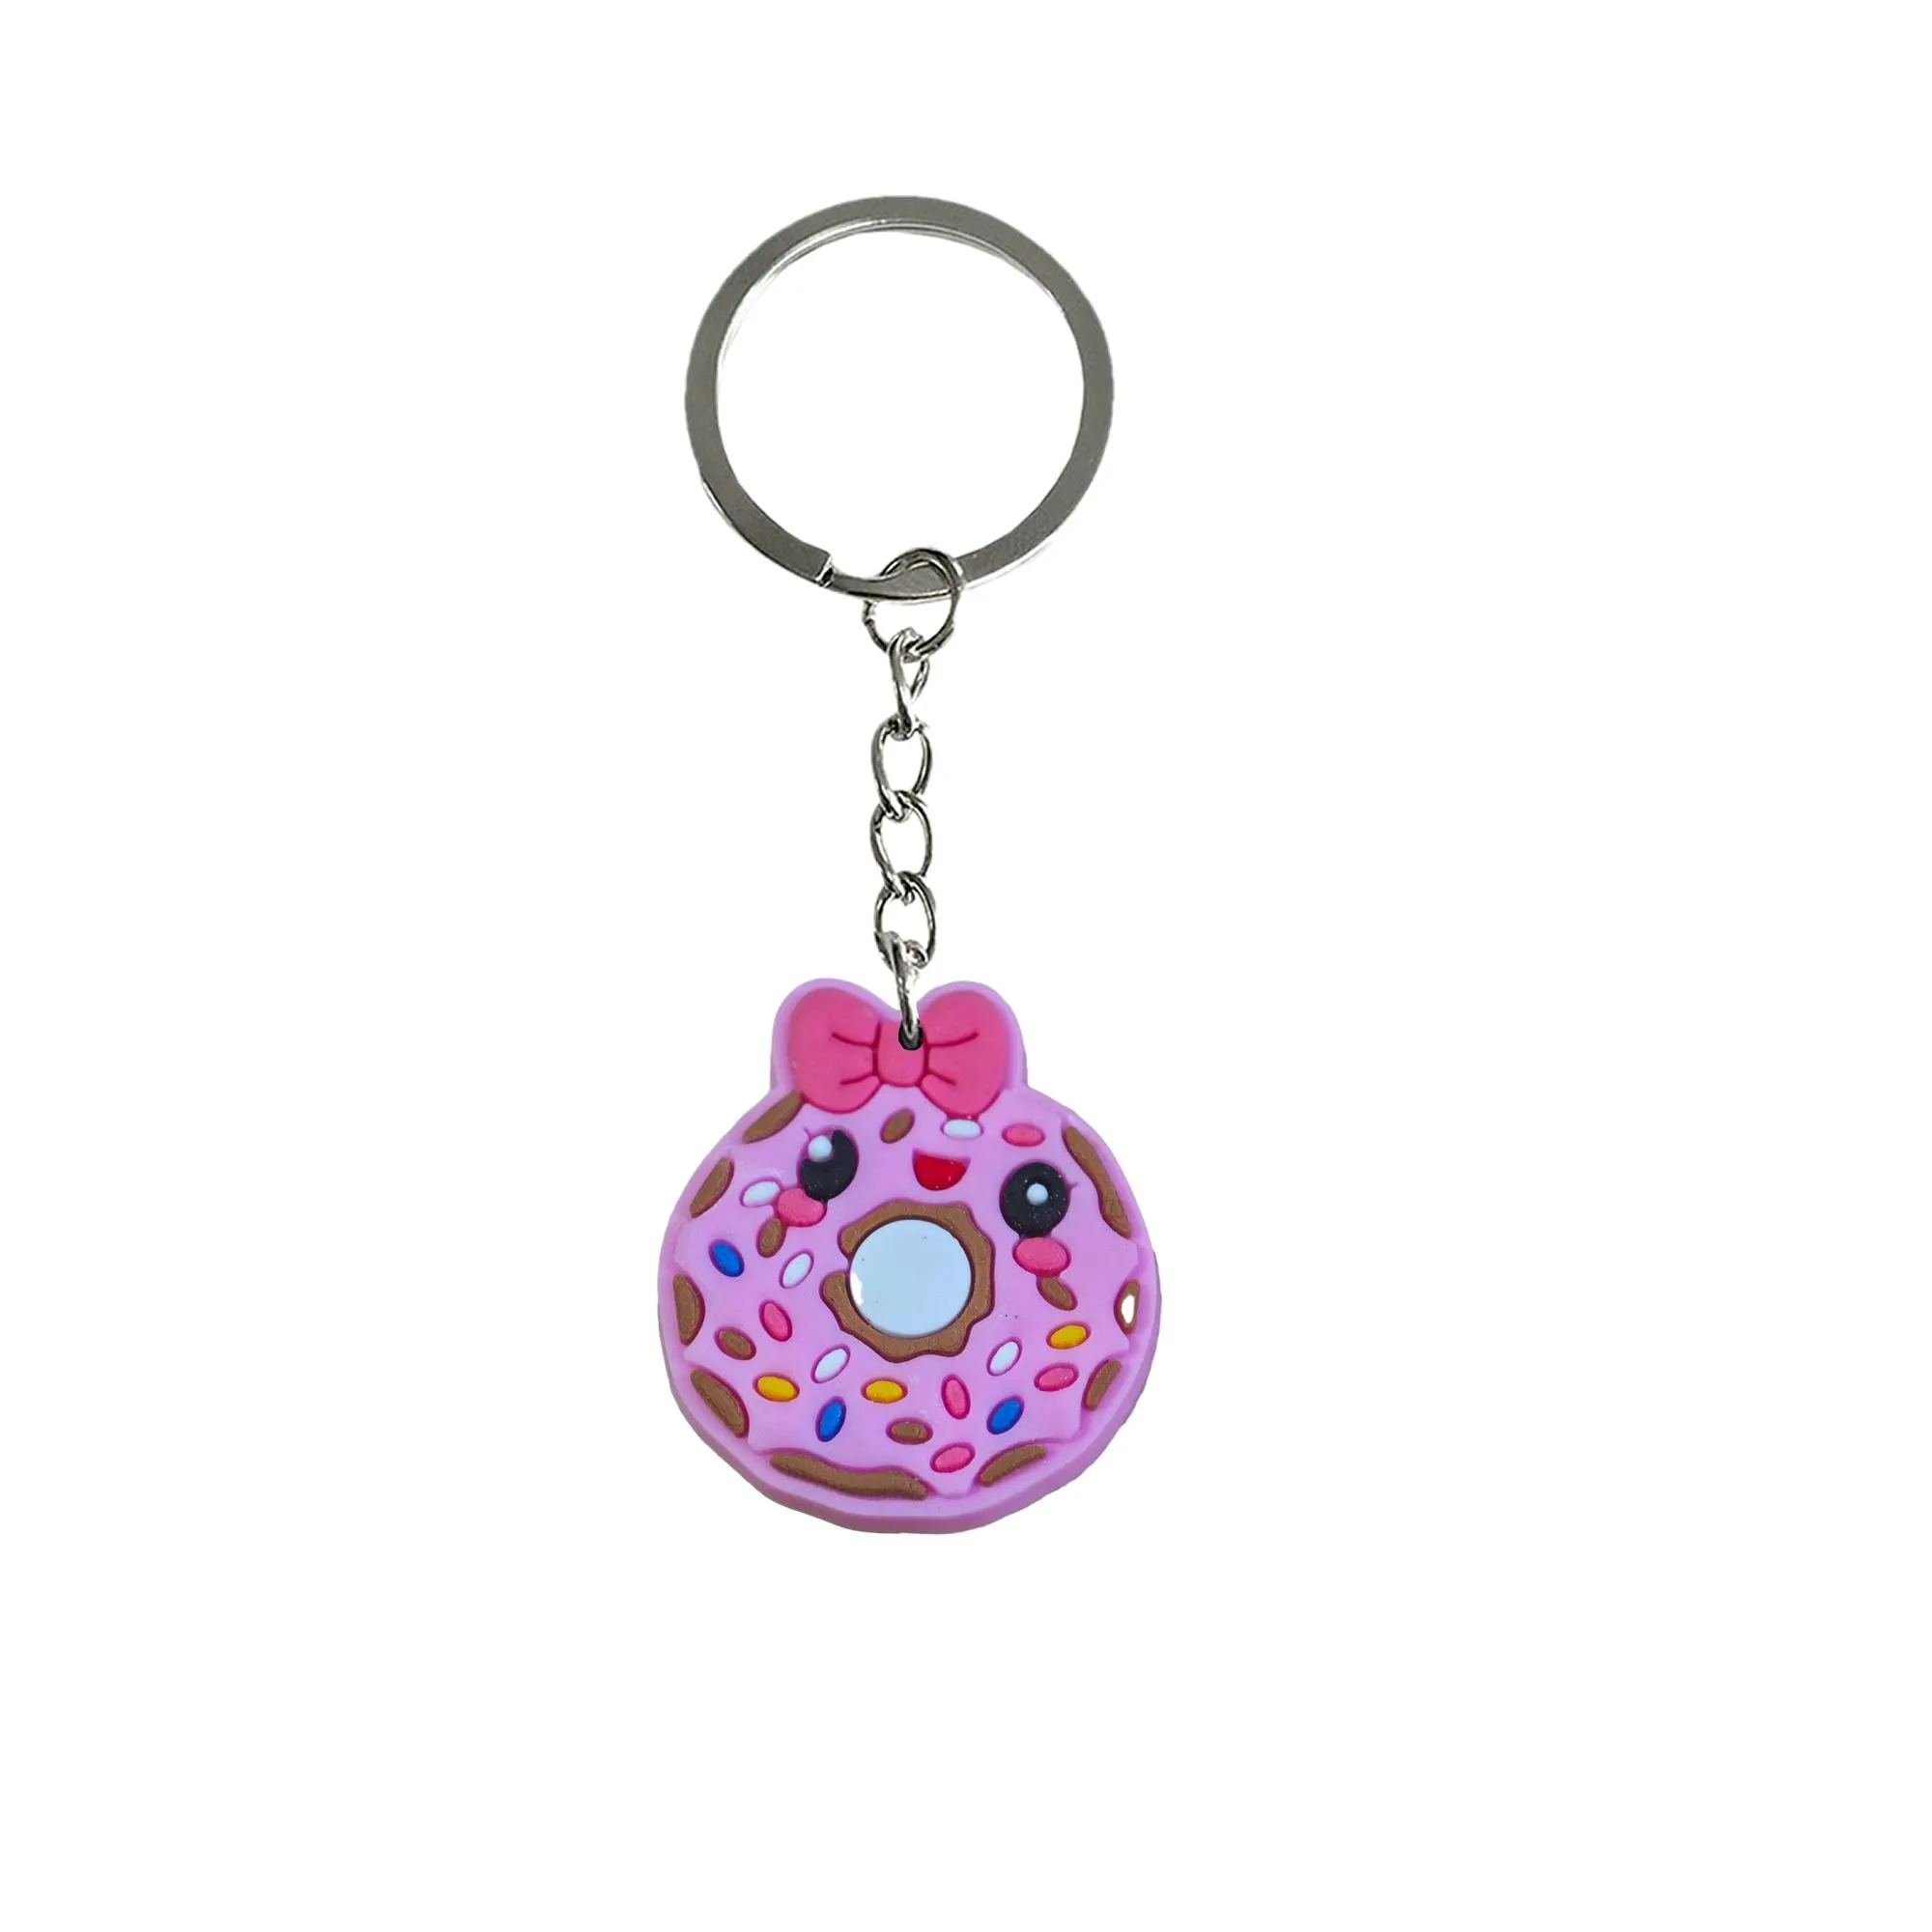 cartoon donuts keychain pendants accessories for kids birthday party favors key ring girls keyring suitable schoolbag keychains backpack cool colorful anime character with wristlet school day supplies gift